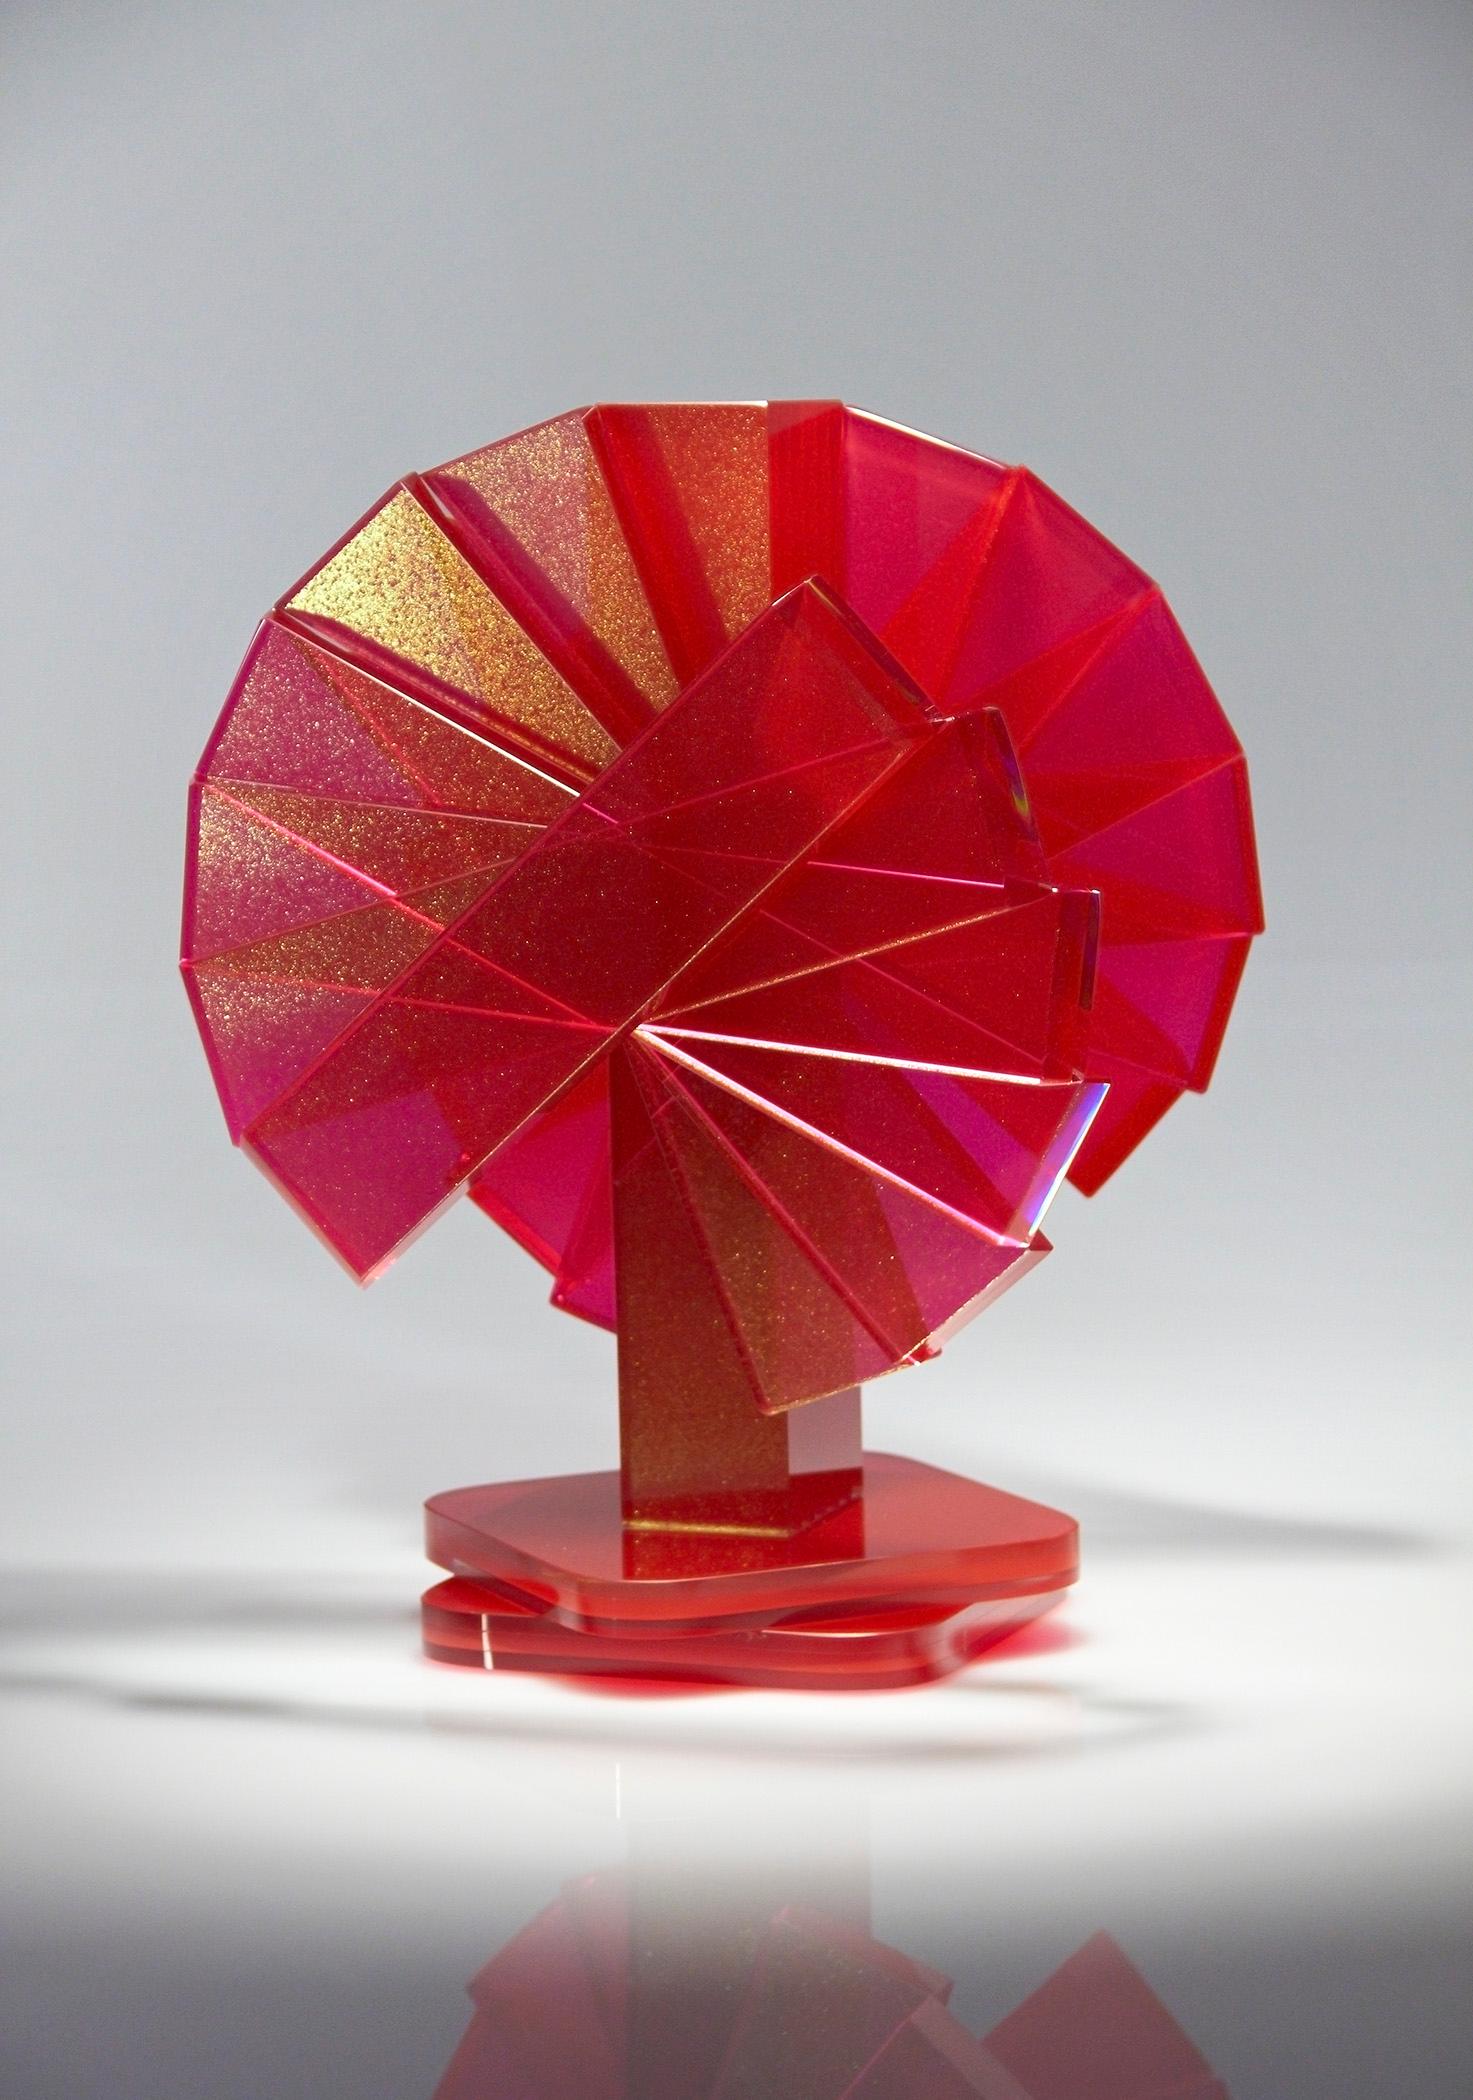 With 40 years in the contemporary glass art field, Sidney Hutter created the Shifting Transmission series to play with emerging special effect pigments from the coatings industry that he mixes with the pigmented adhesive in his traditional